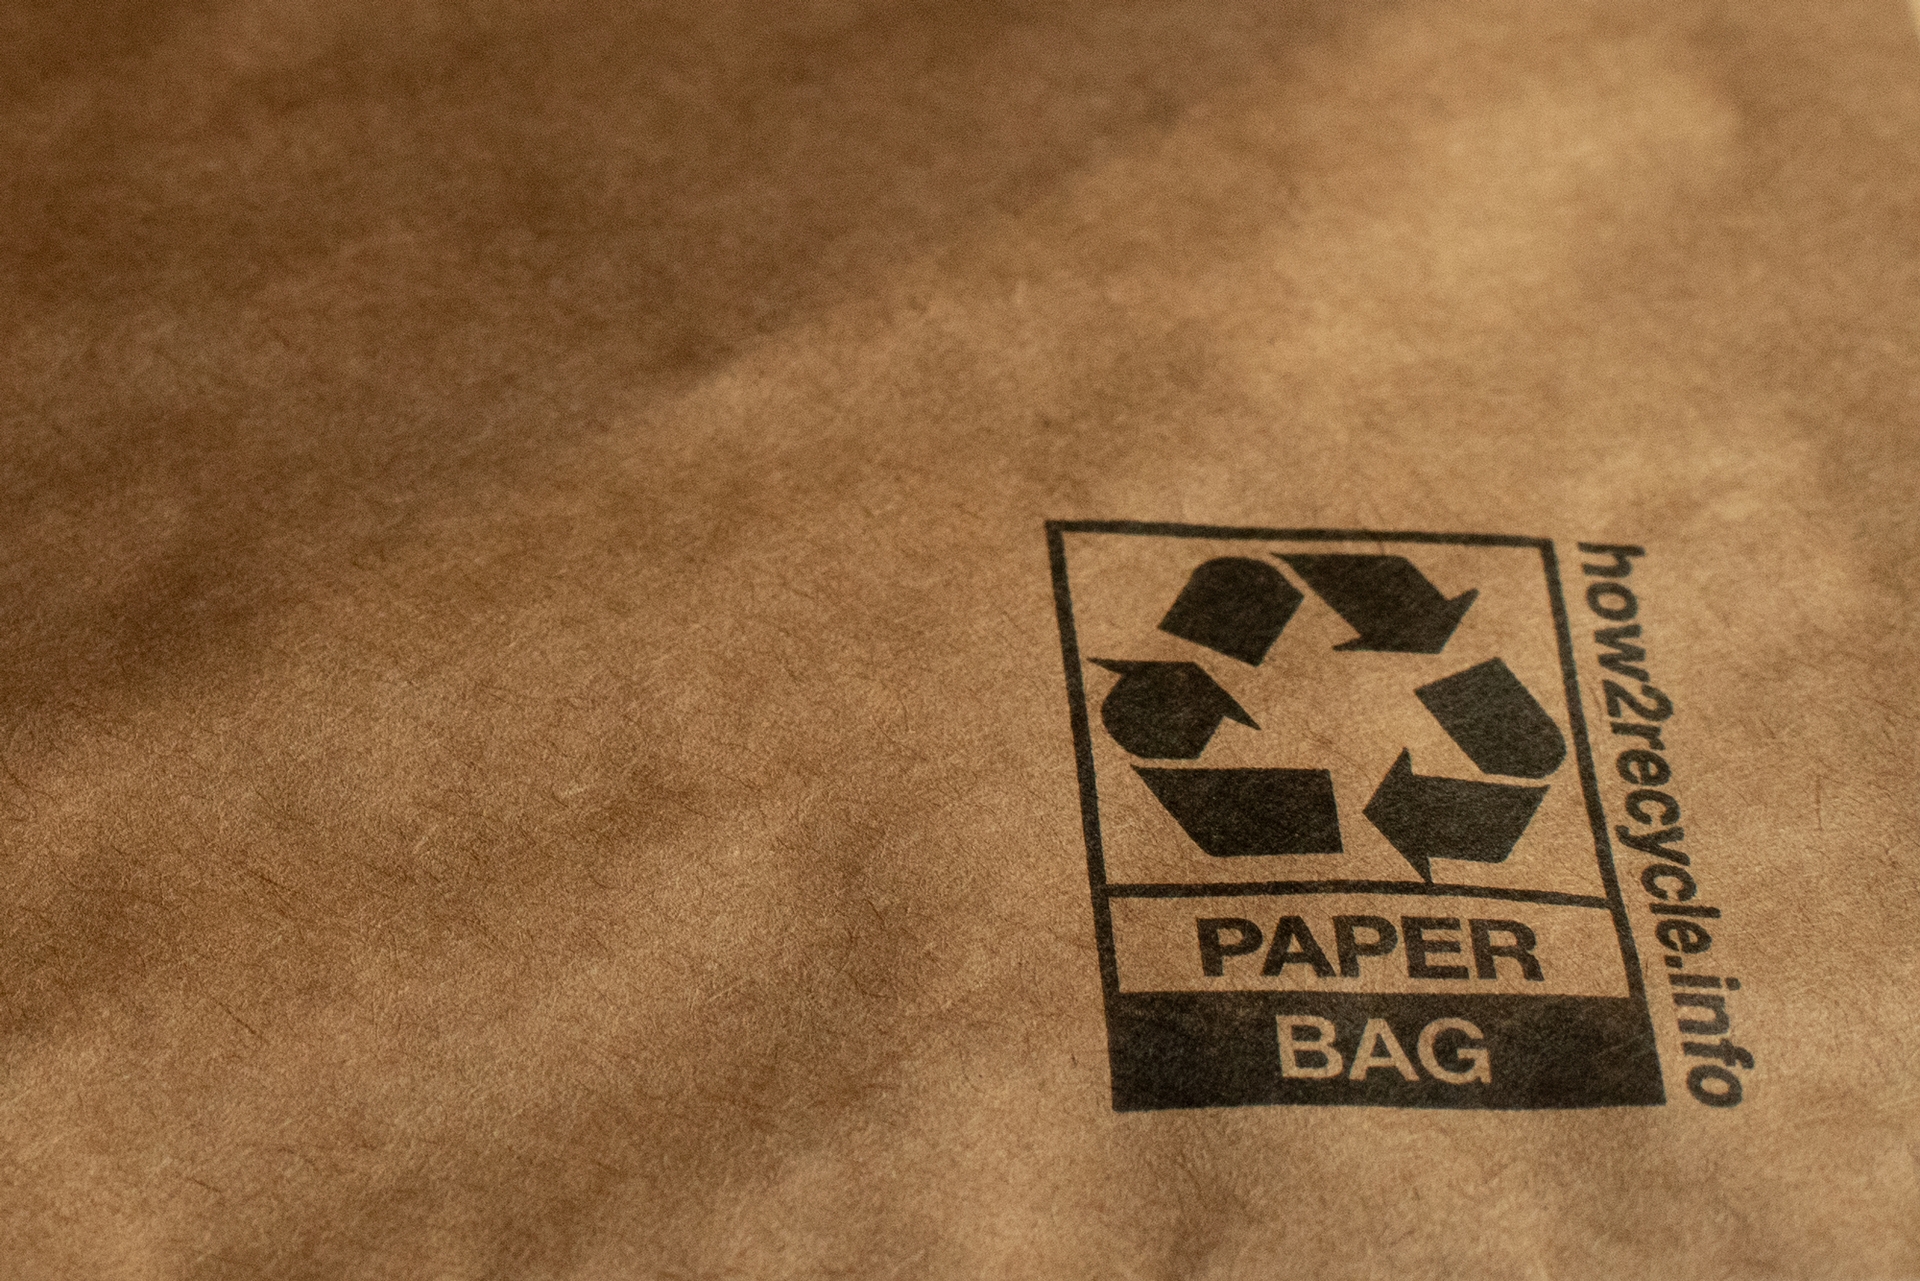 Detail of a padded mailer showing a recycling symbol, the words "paper bag," and a website: how2recycle.info